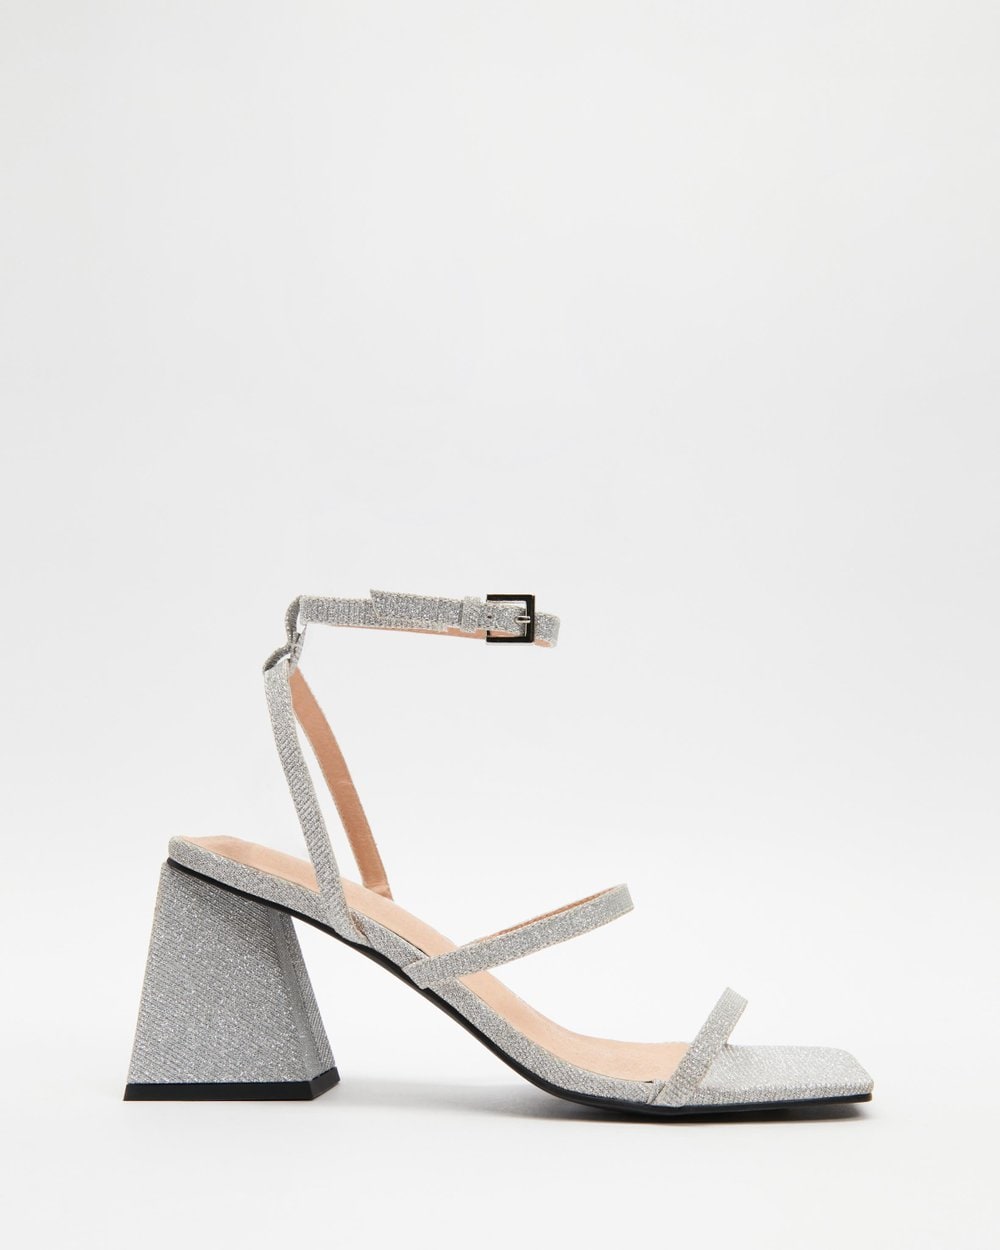 The Dazie Cindy Heels are sparkly silver with a low wedge. Great as summer wedding guest shoes. 